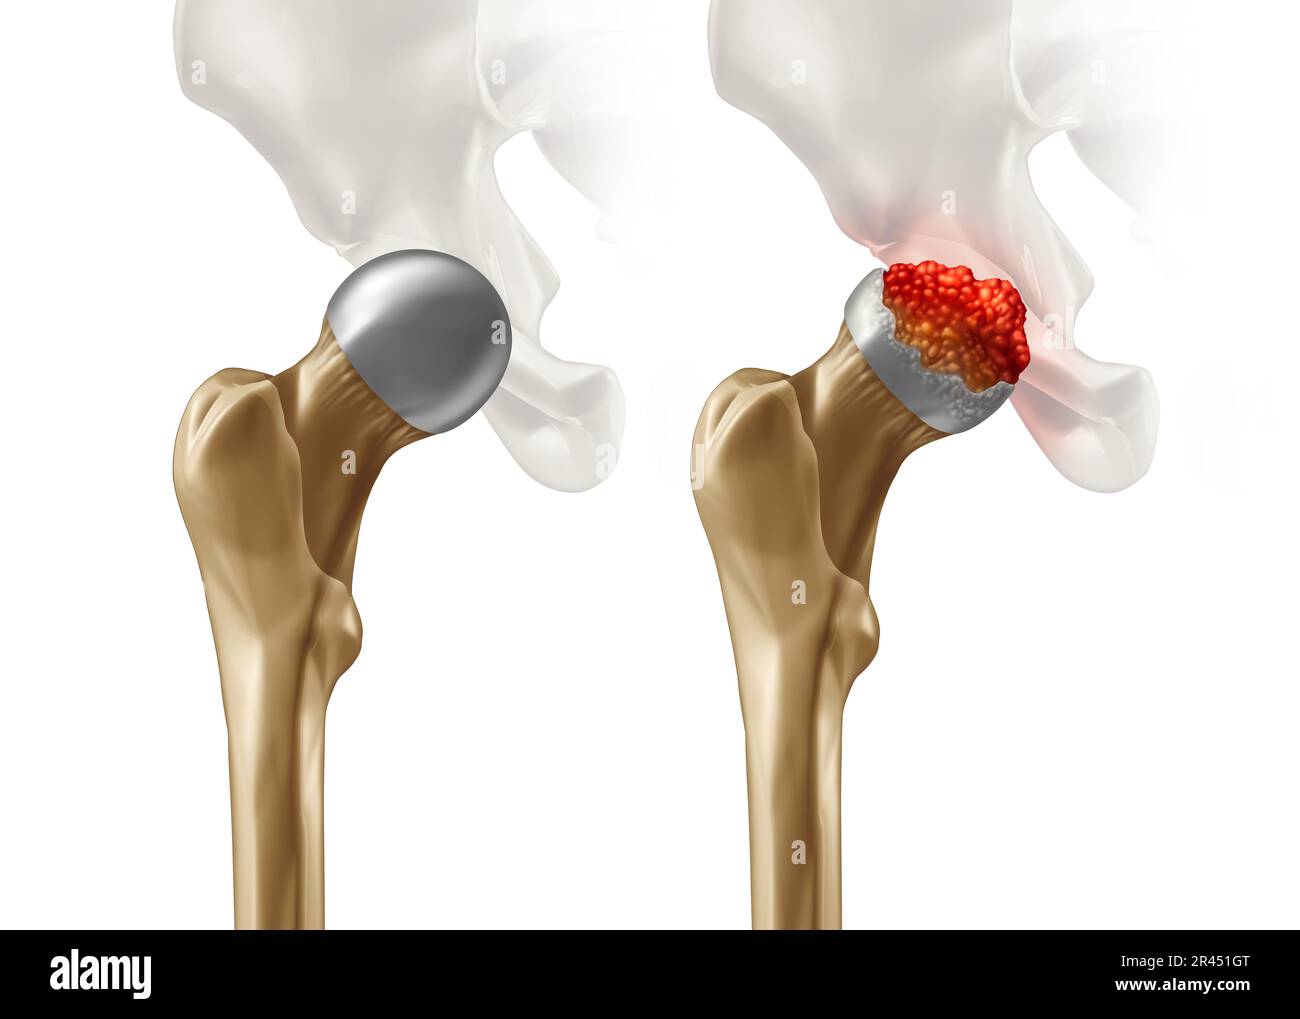 Femoral Head Disease and osteonecrosis or avascular necrosis and aseptic necrosis with a healthy hip compared to an osteoarthritis damaged pelvic join Stock Photo